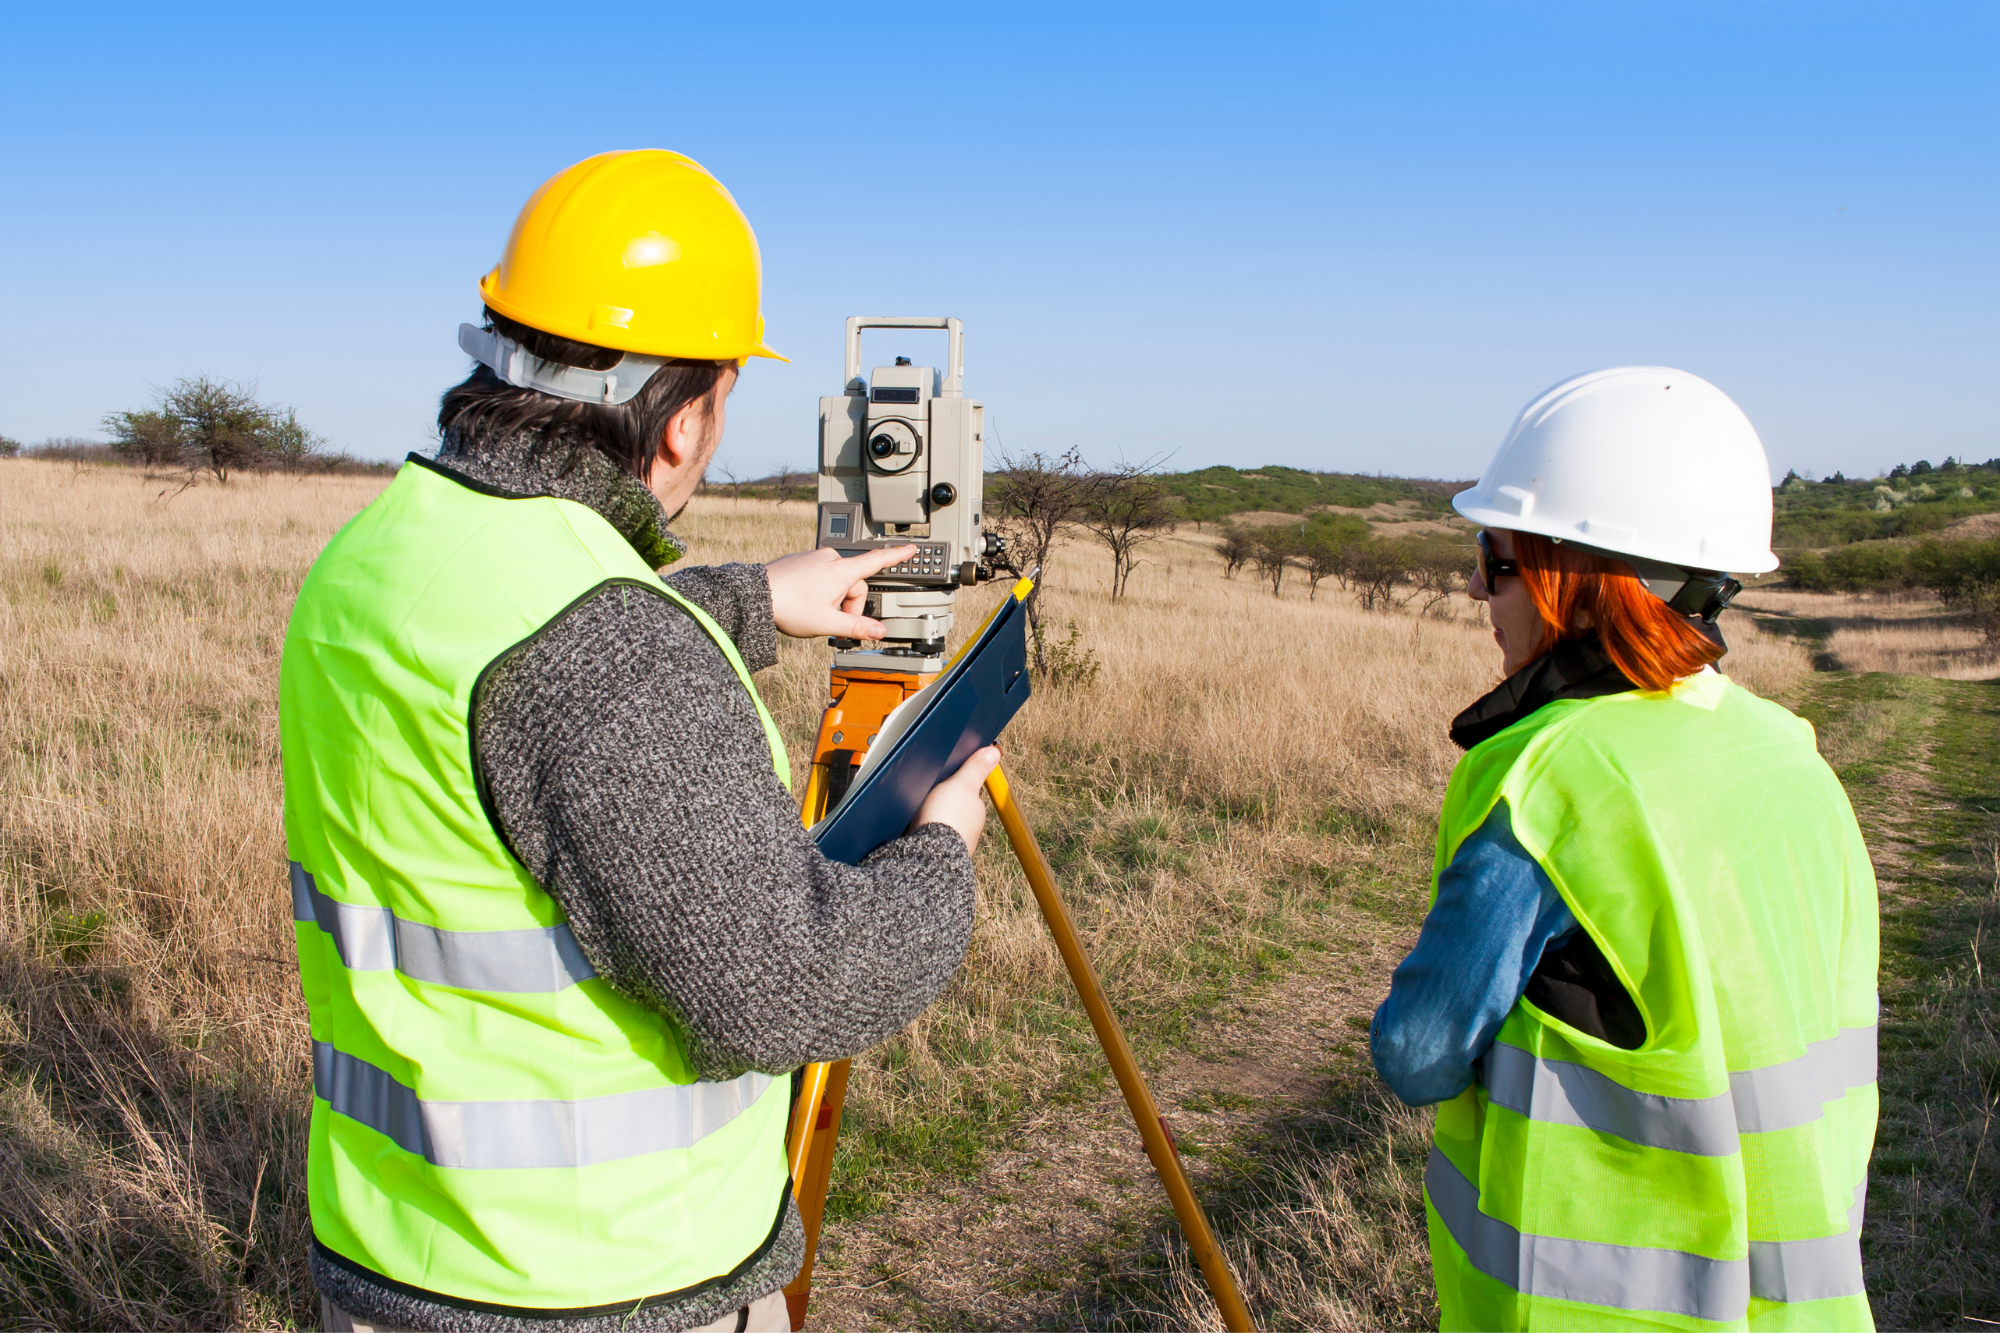 two land surveyors using equipment to survey untouched land on a sunny day